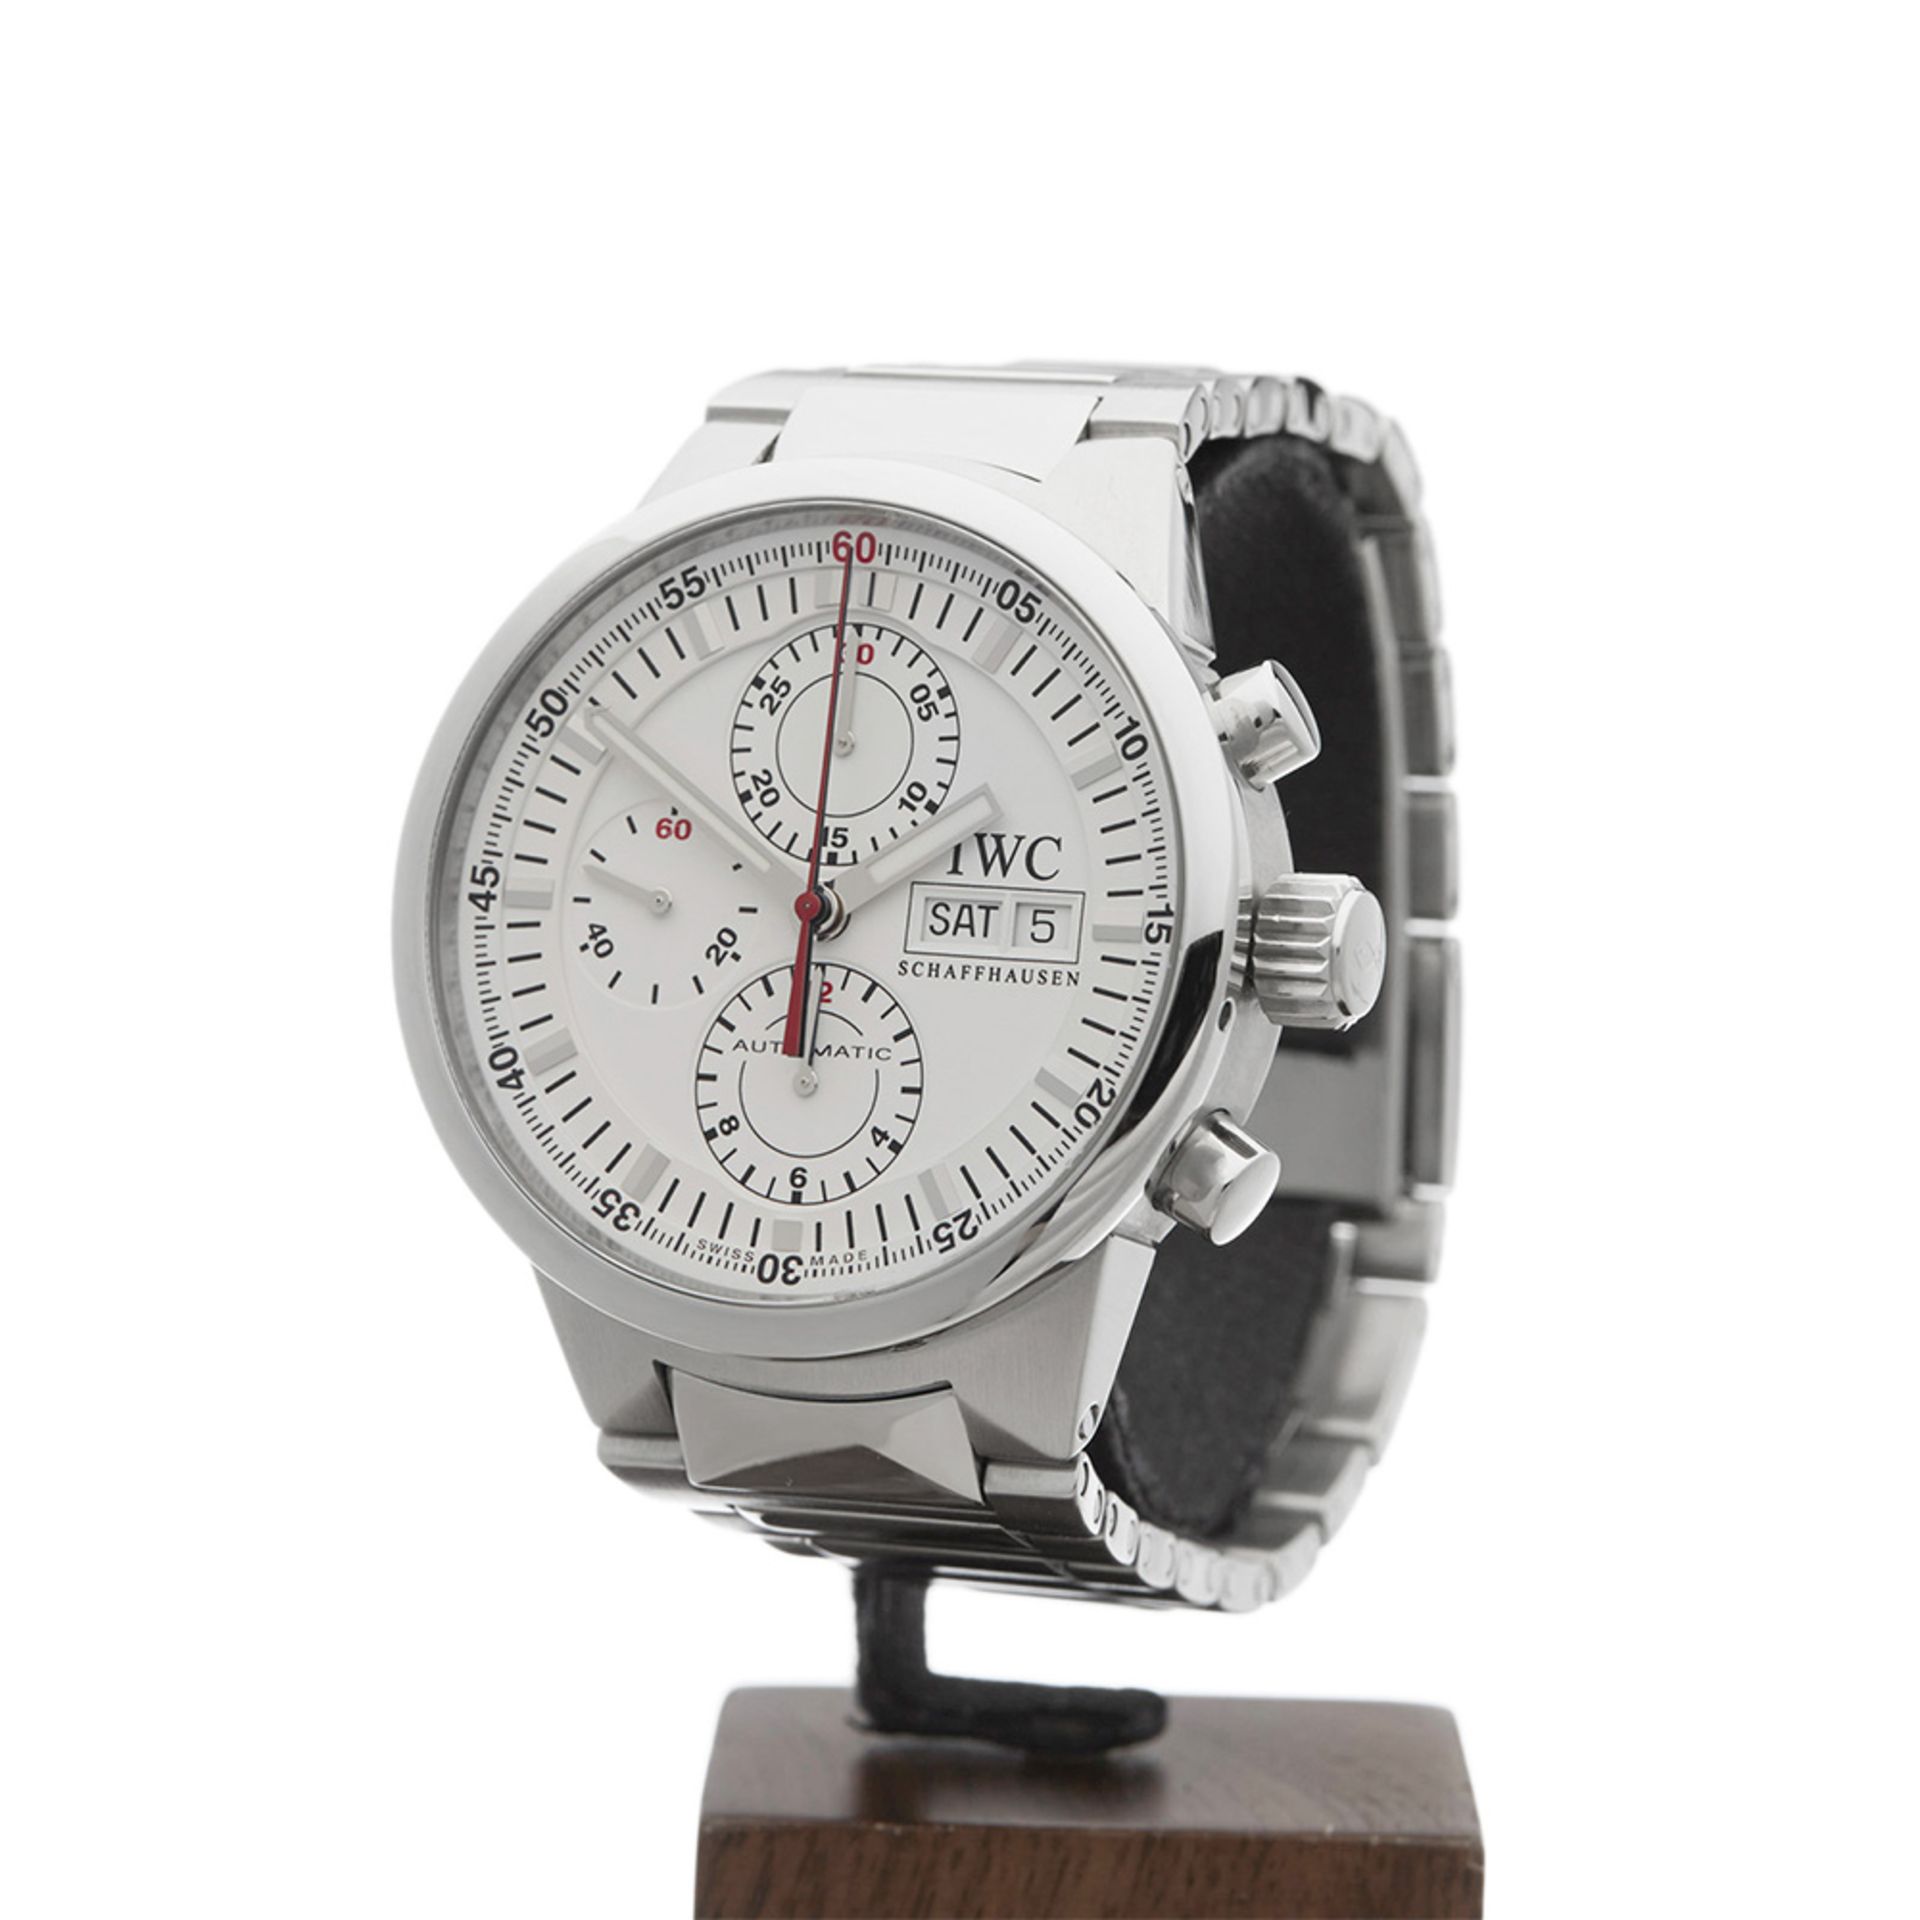 IWC GST Rattrapante Chronograph 43mm Stainless Steel - IW371523 - Image 3 of 9